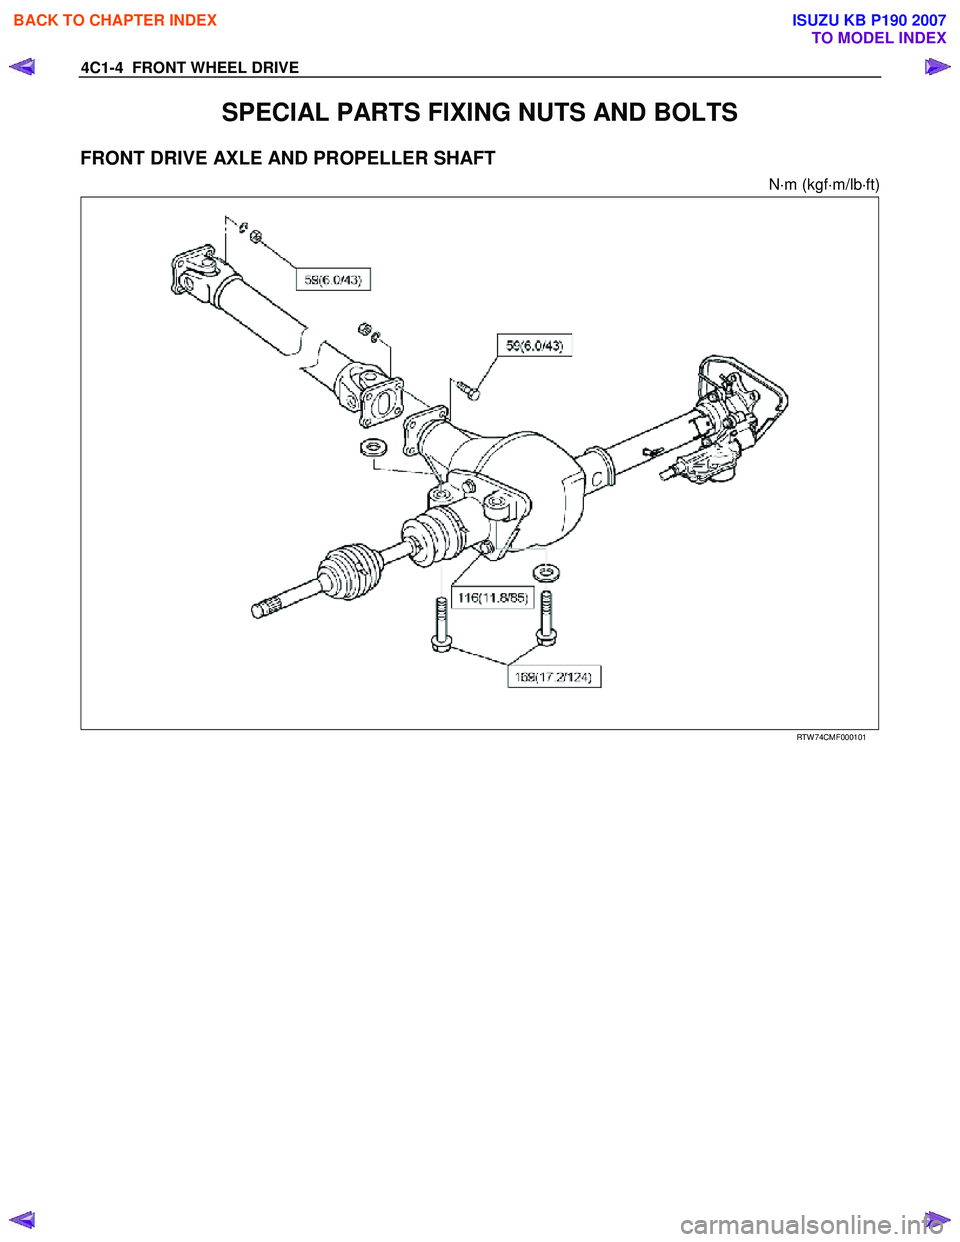 ISUZU KB P190 2007  Workshop User Guide 4C1-4  FRONT WHEEL DRIVE 
SPECIAL PARTS FIXING NUTS AND BOLTS 
FRONT DRIVE AXLE AND PROPELLER SHAFT 
N⋅m (kgf ⋅m/lb ⋅ft) 
 
 
 
 
RTW 74CMF000101 
 
BACK TO CHAPTER INDEX
TO MODEL INDEX
ISUZU KB